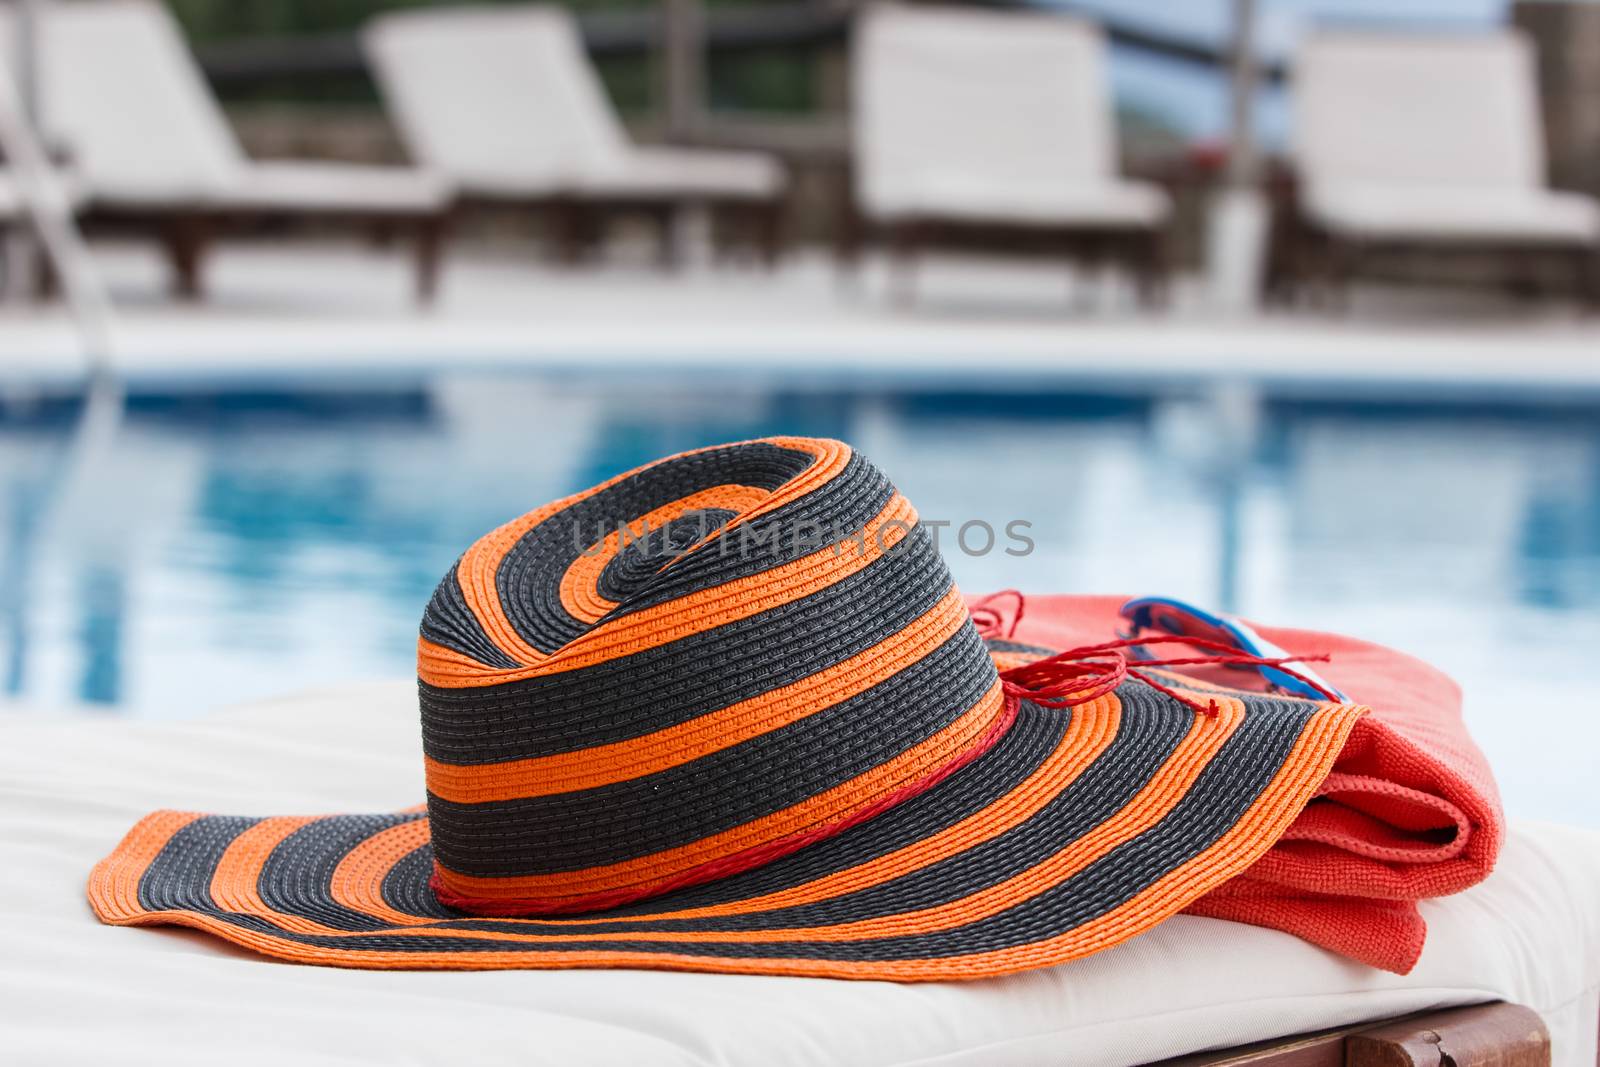 Sunbathing accessories on beach towel by a swimming pool